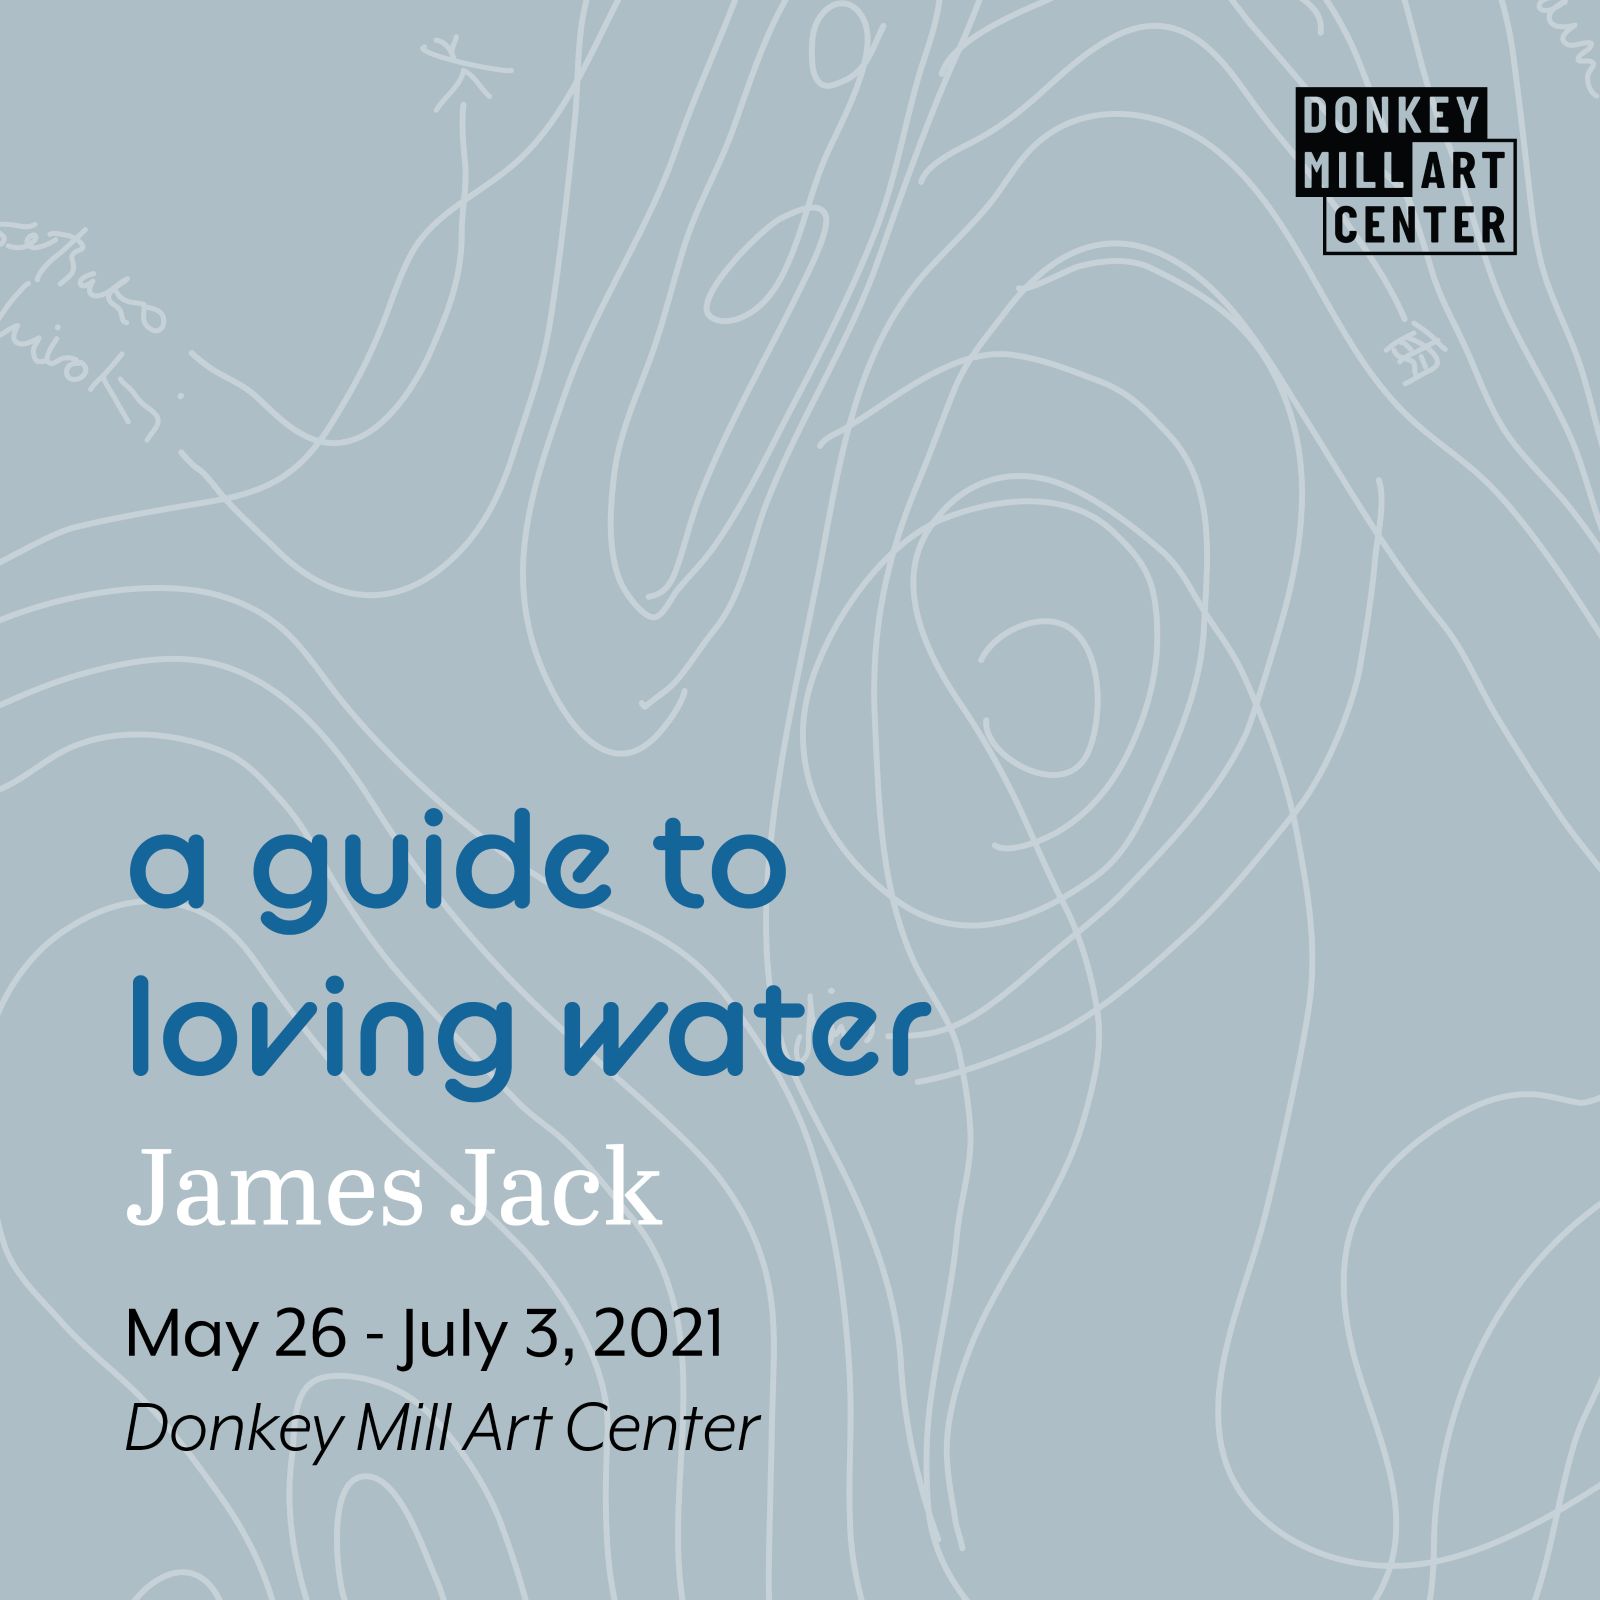 Exhibit: James Jack: a guide to loving water